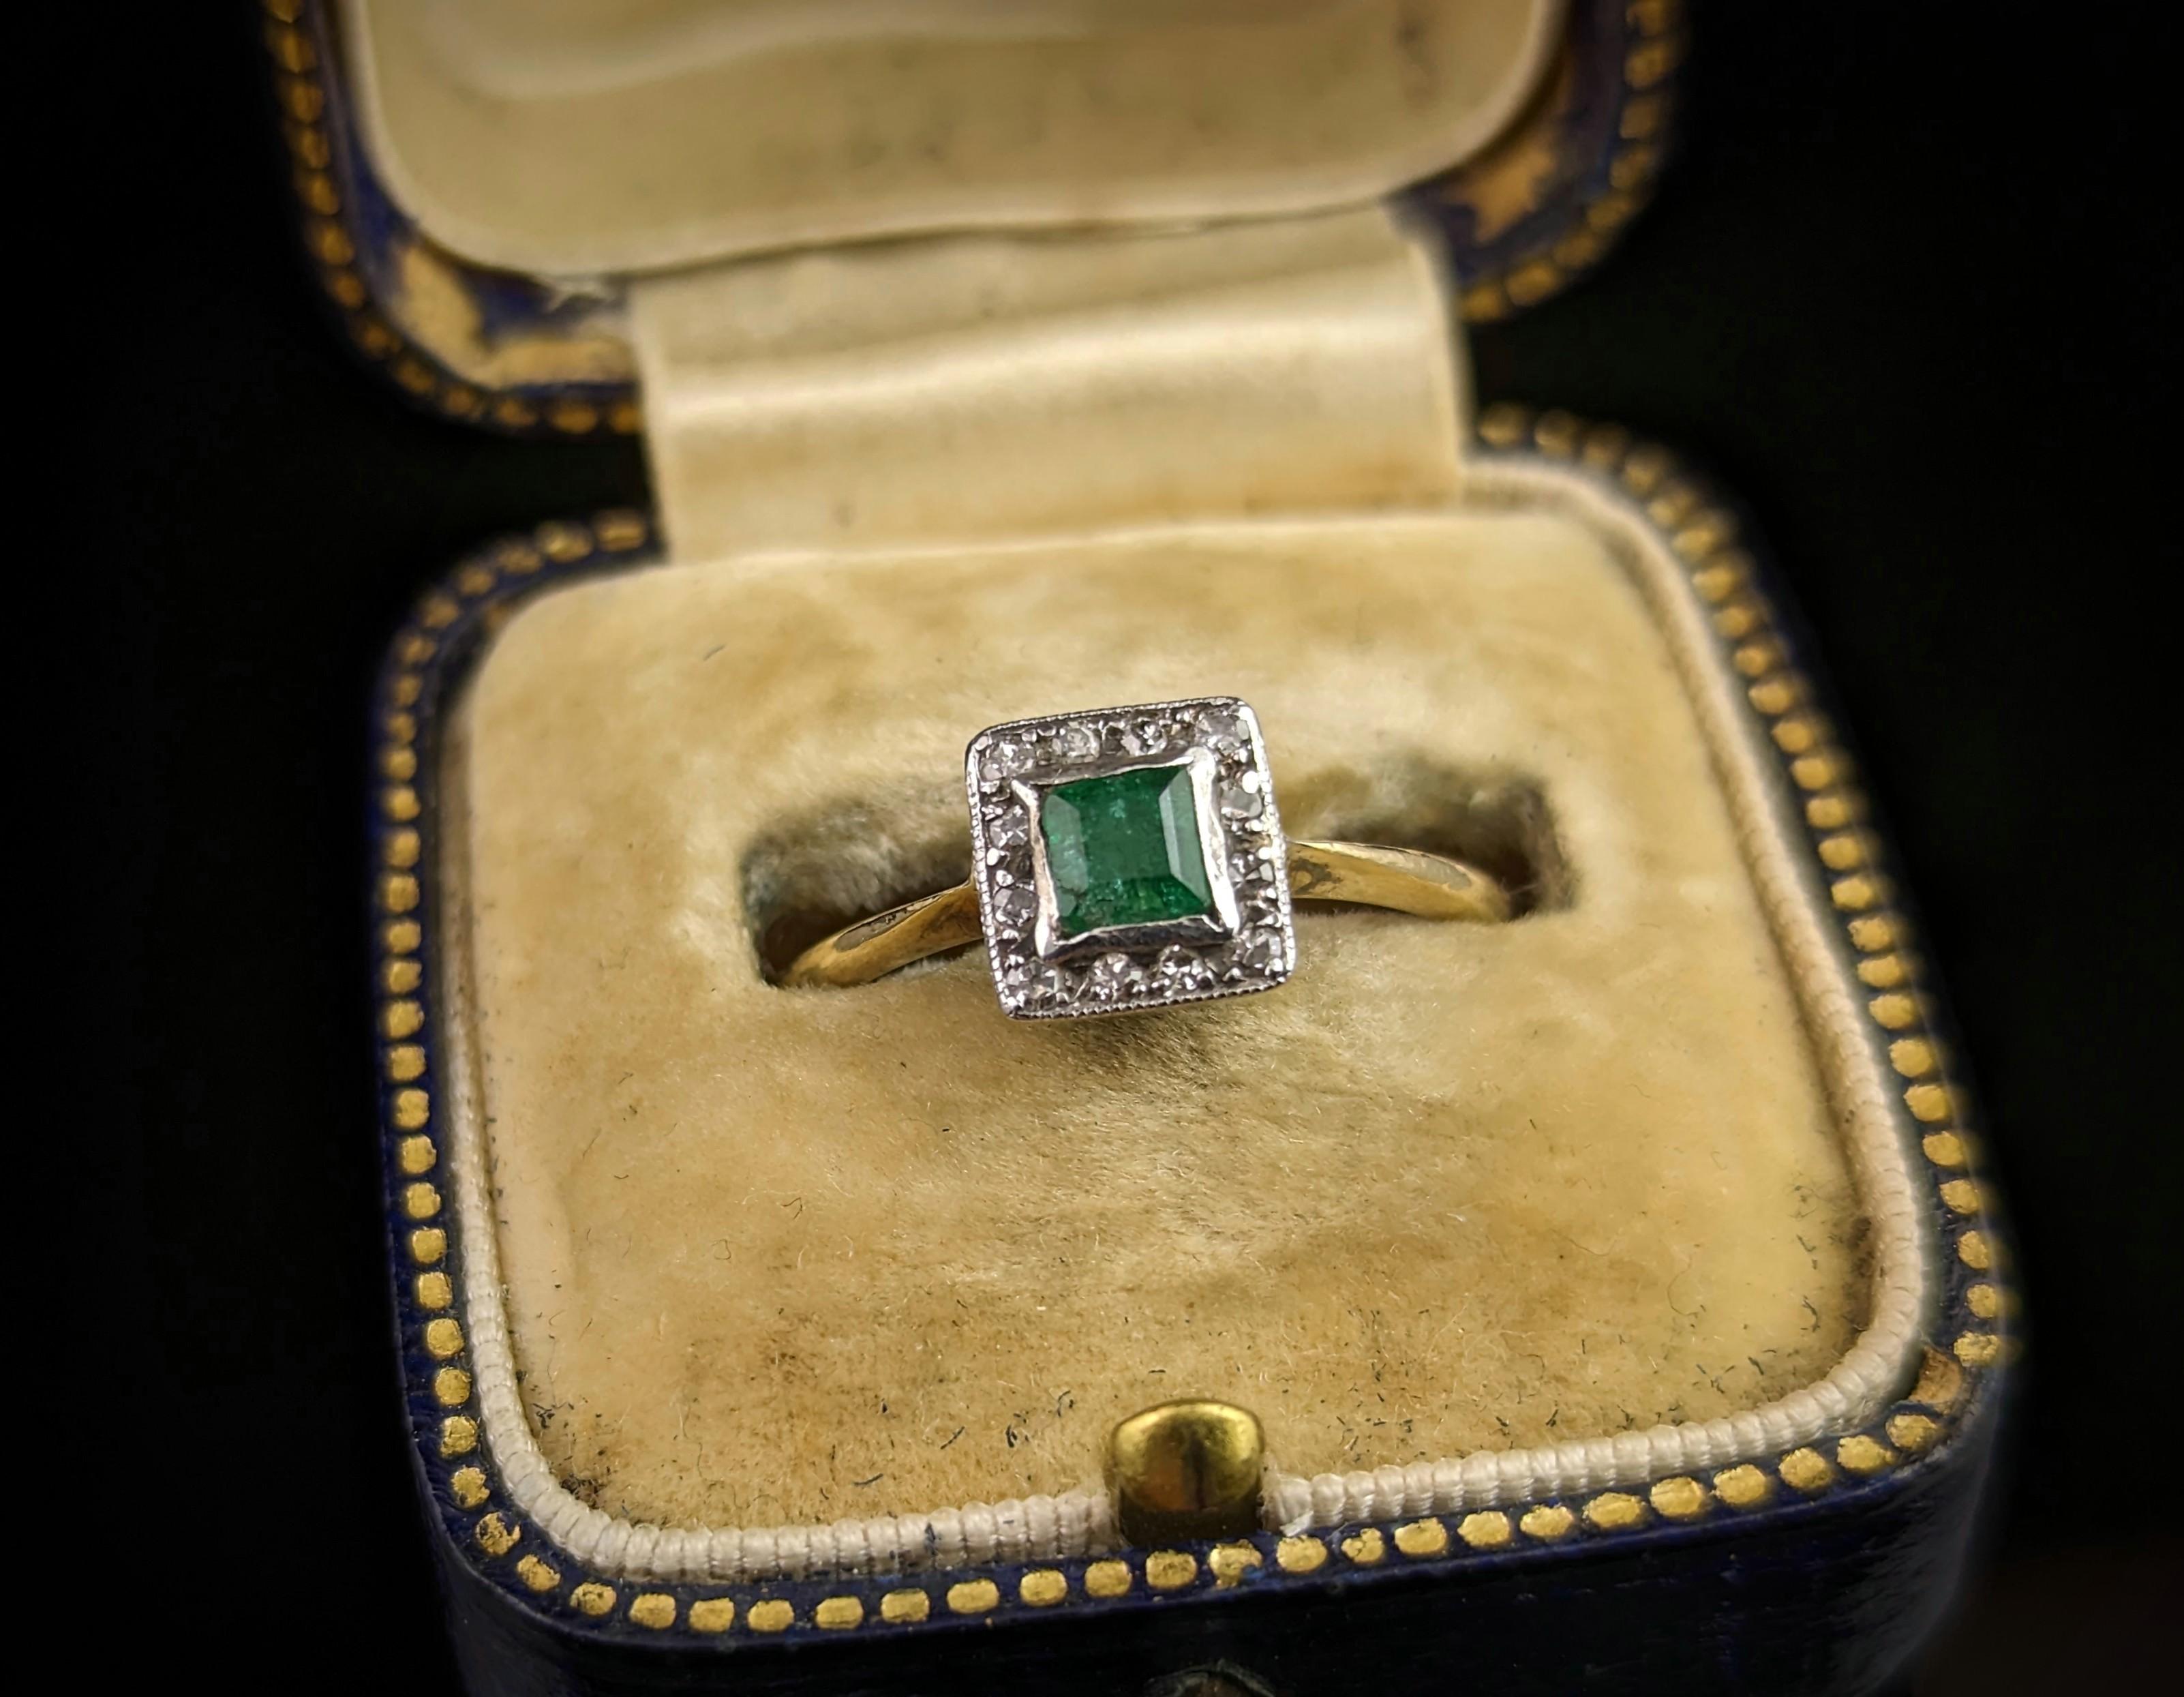 Emerald Cut Vintage Art Deco Emerald and Diamond Ring, 18k Gold and Platinum